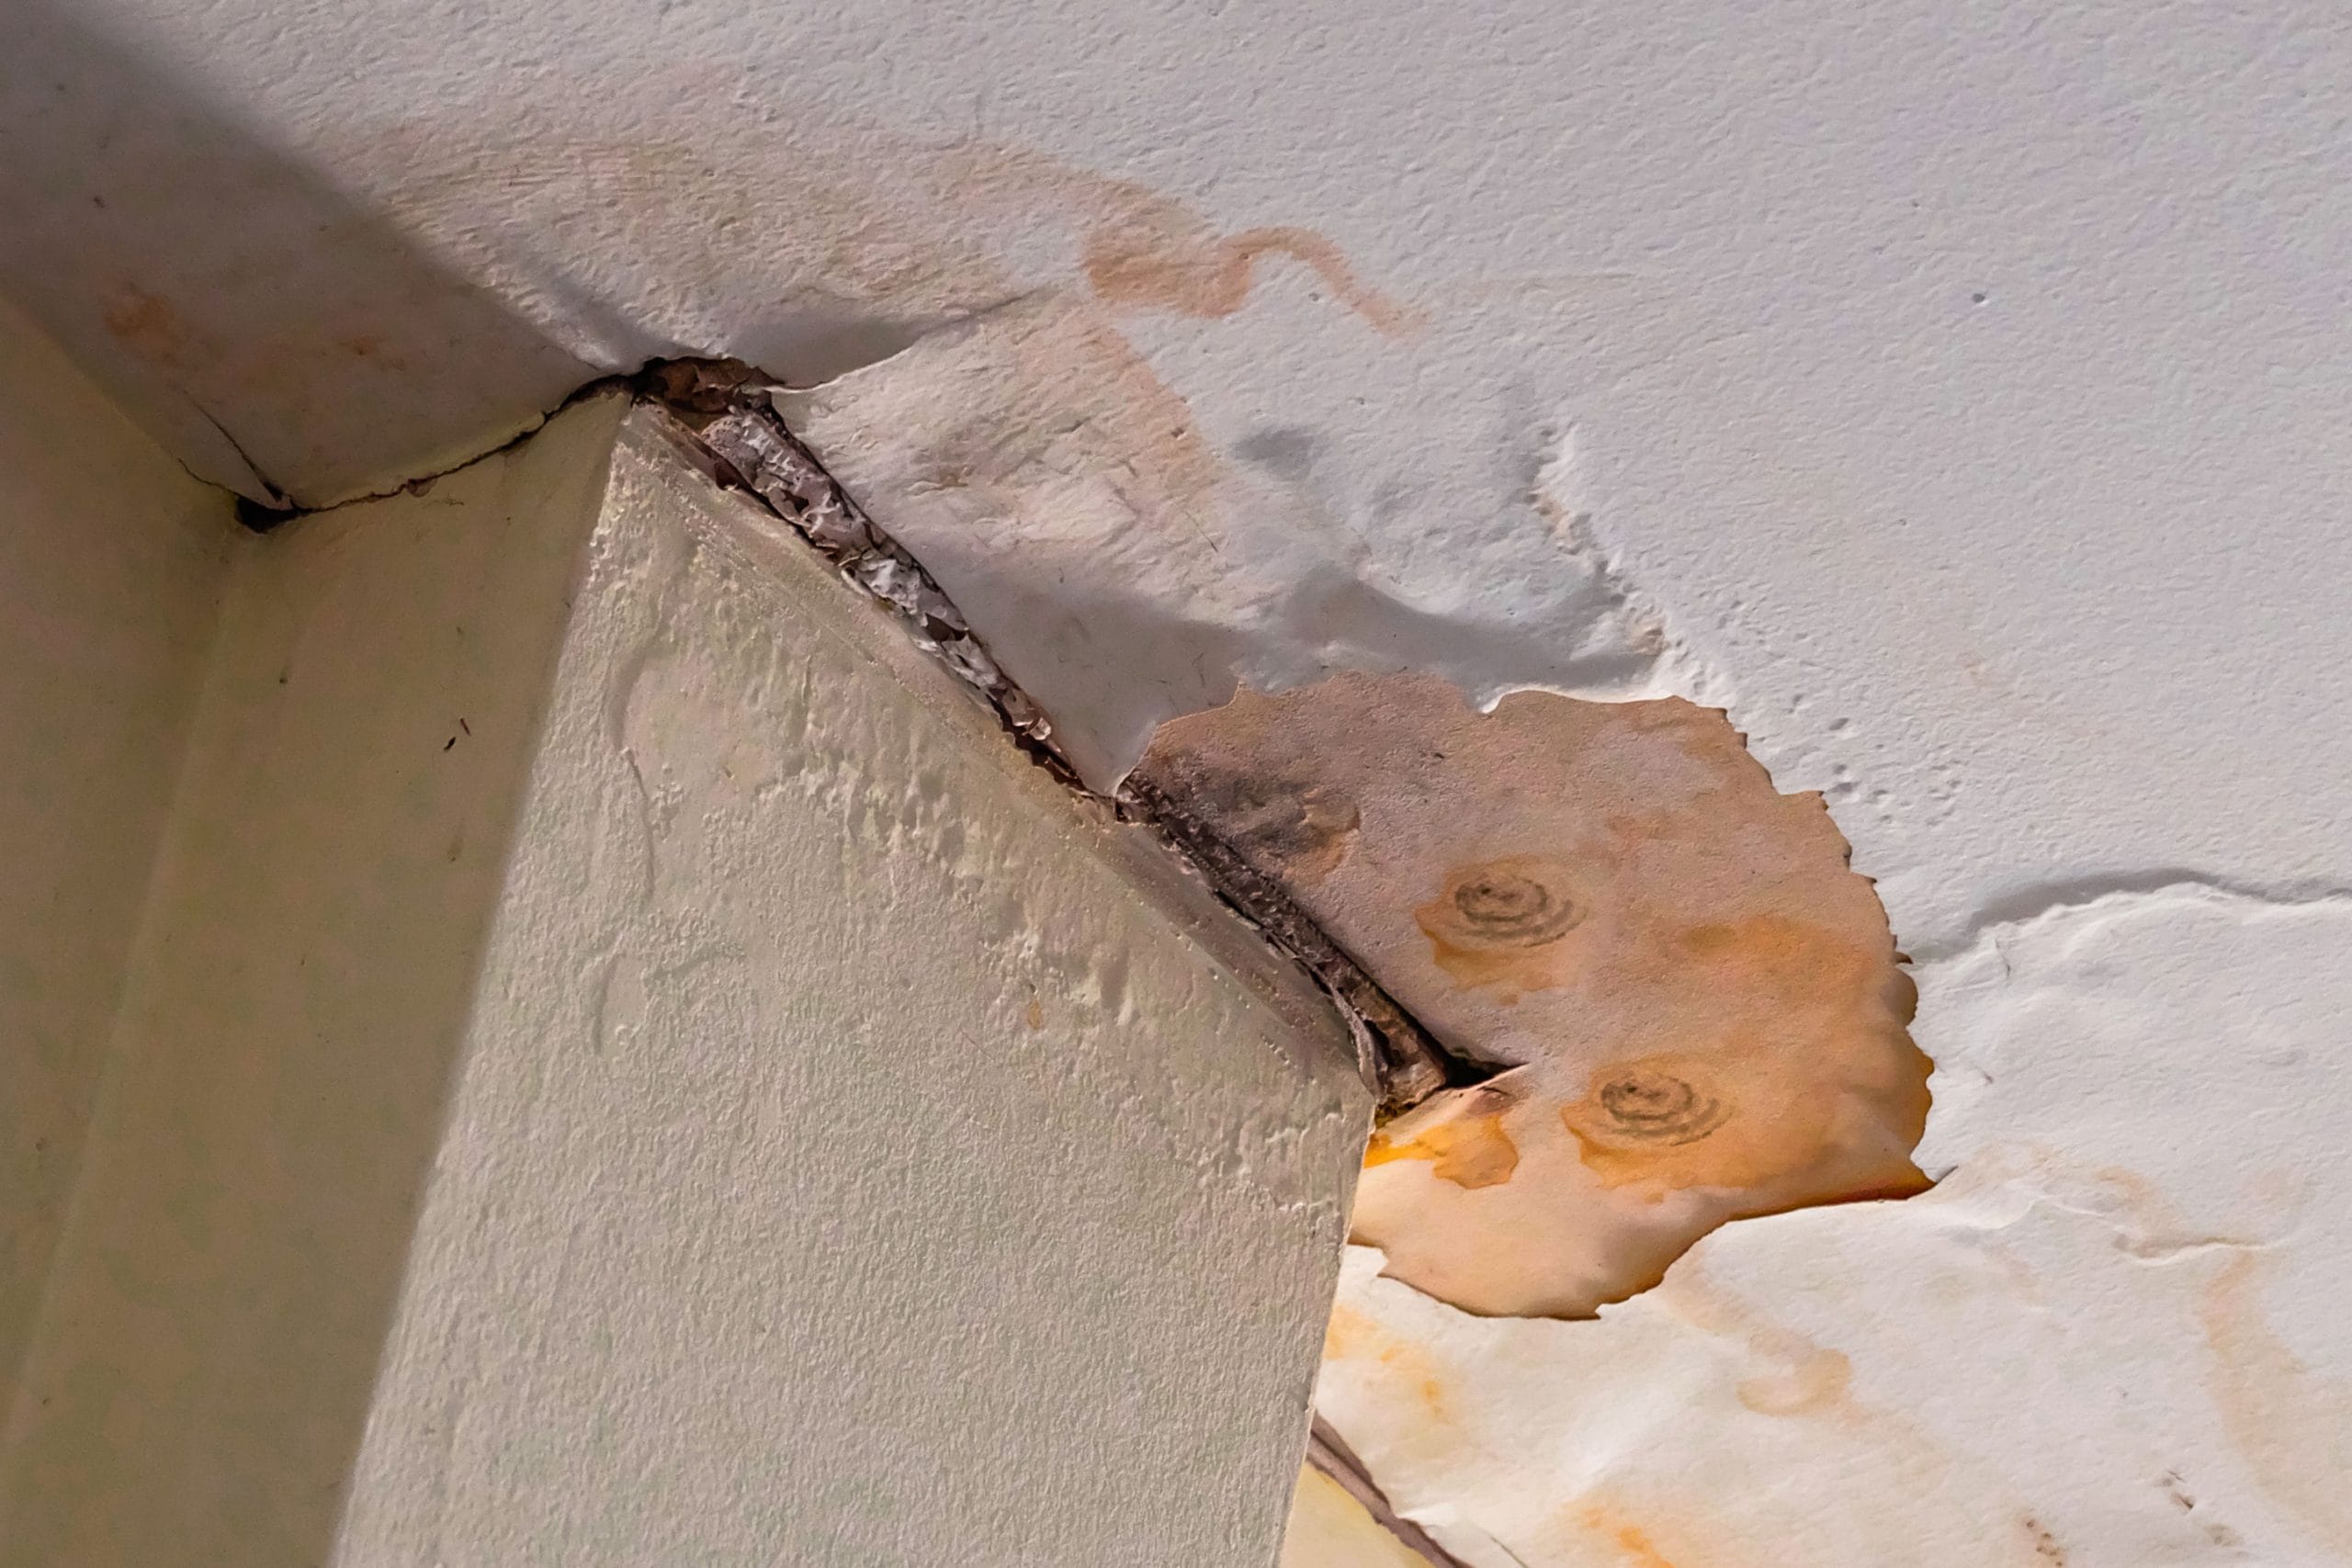 mold remediation experts can help with mold from moisture in a ceiling.